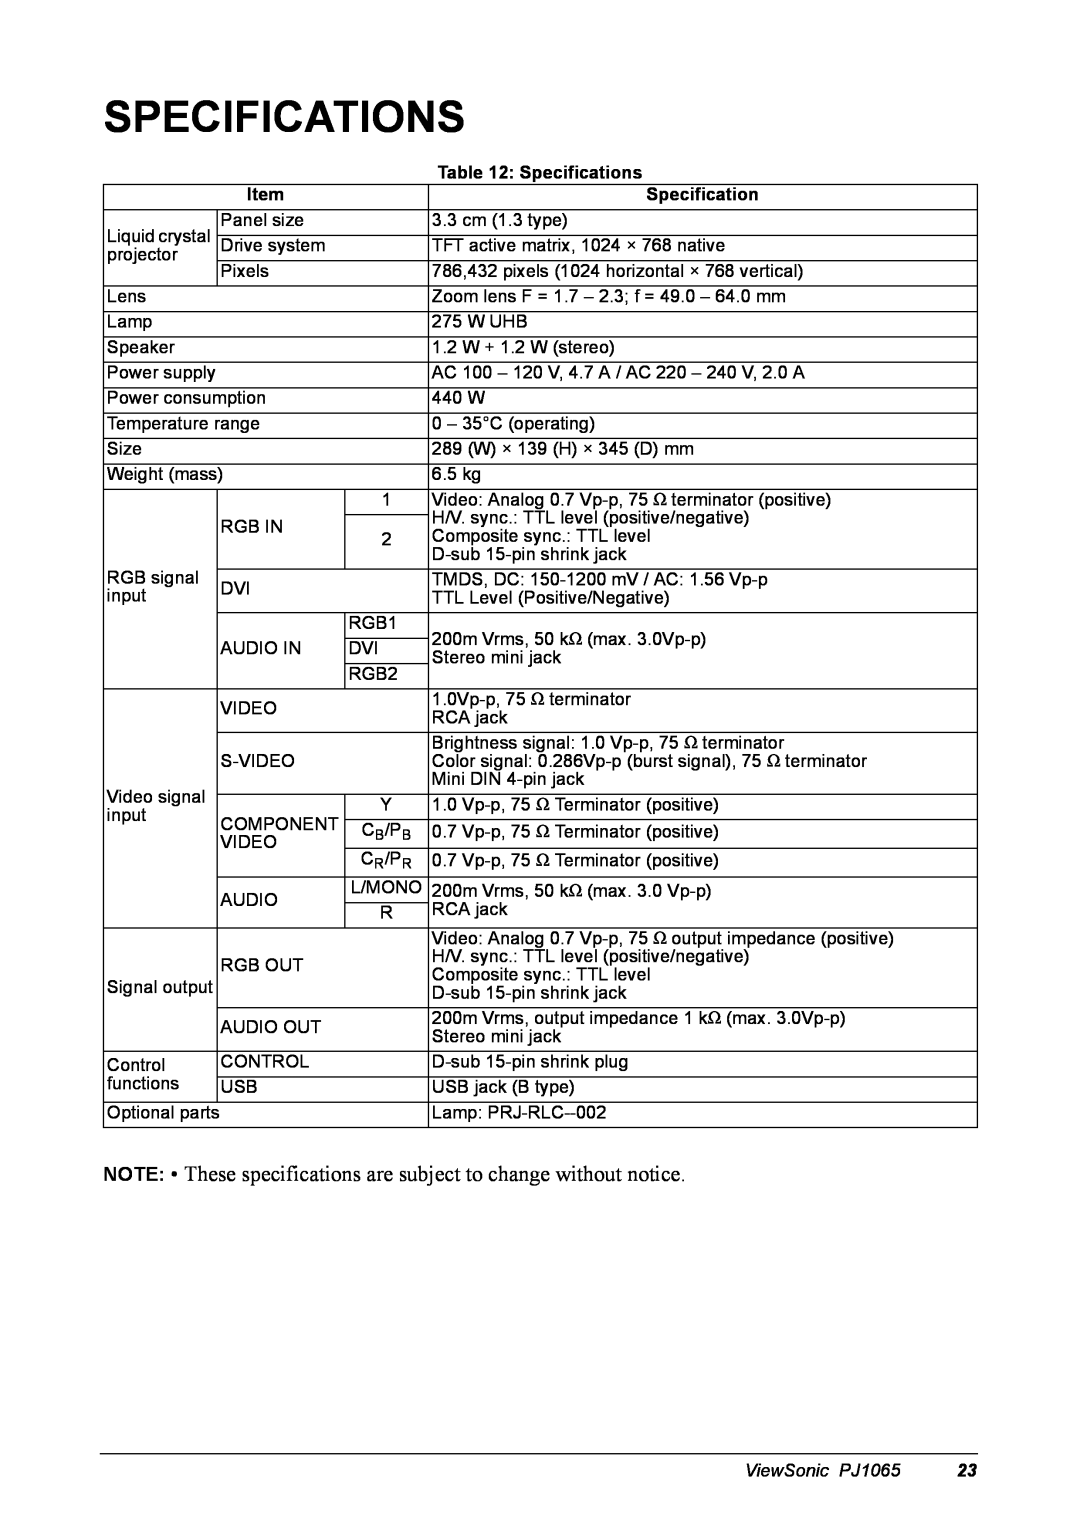 ViewSonic manual Specifications, NOTE These specifications are subject to change without notice, ViewSonic PJ1065 